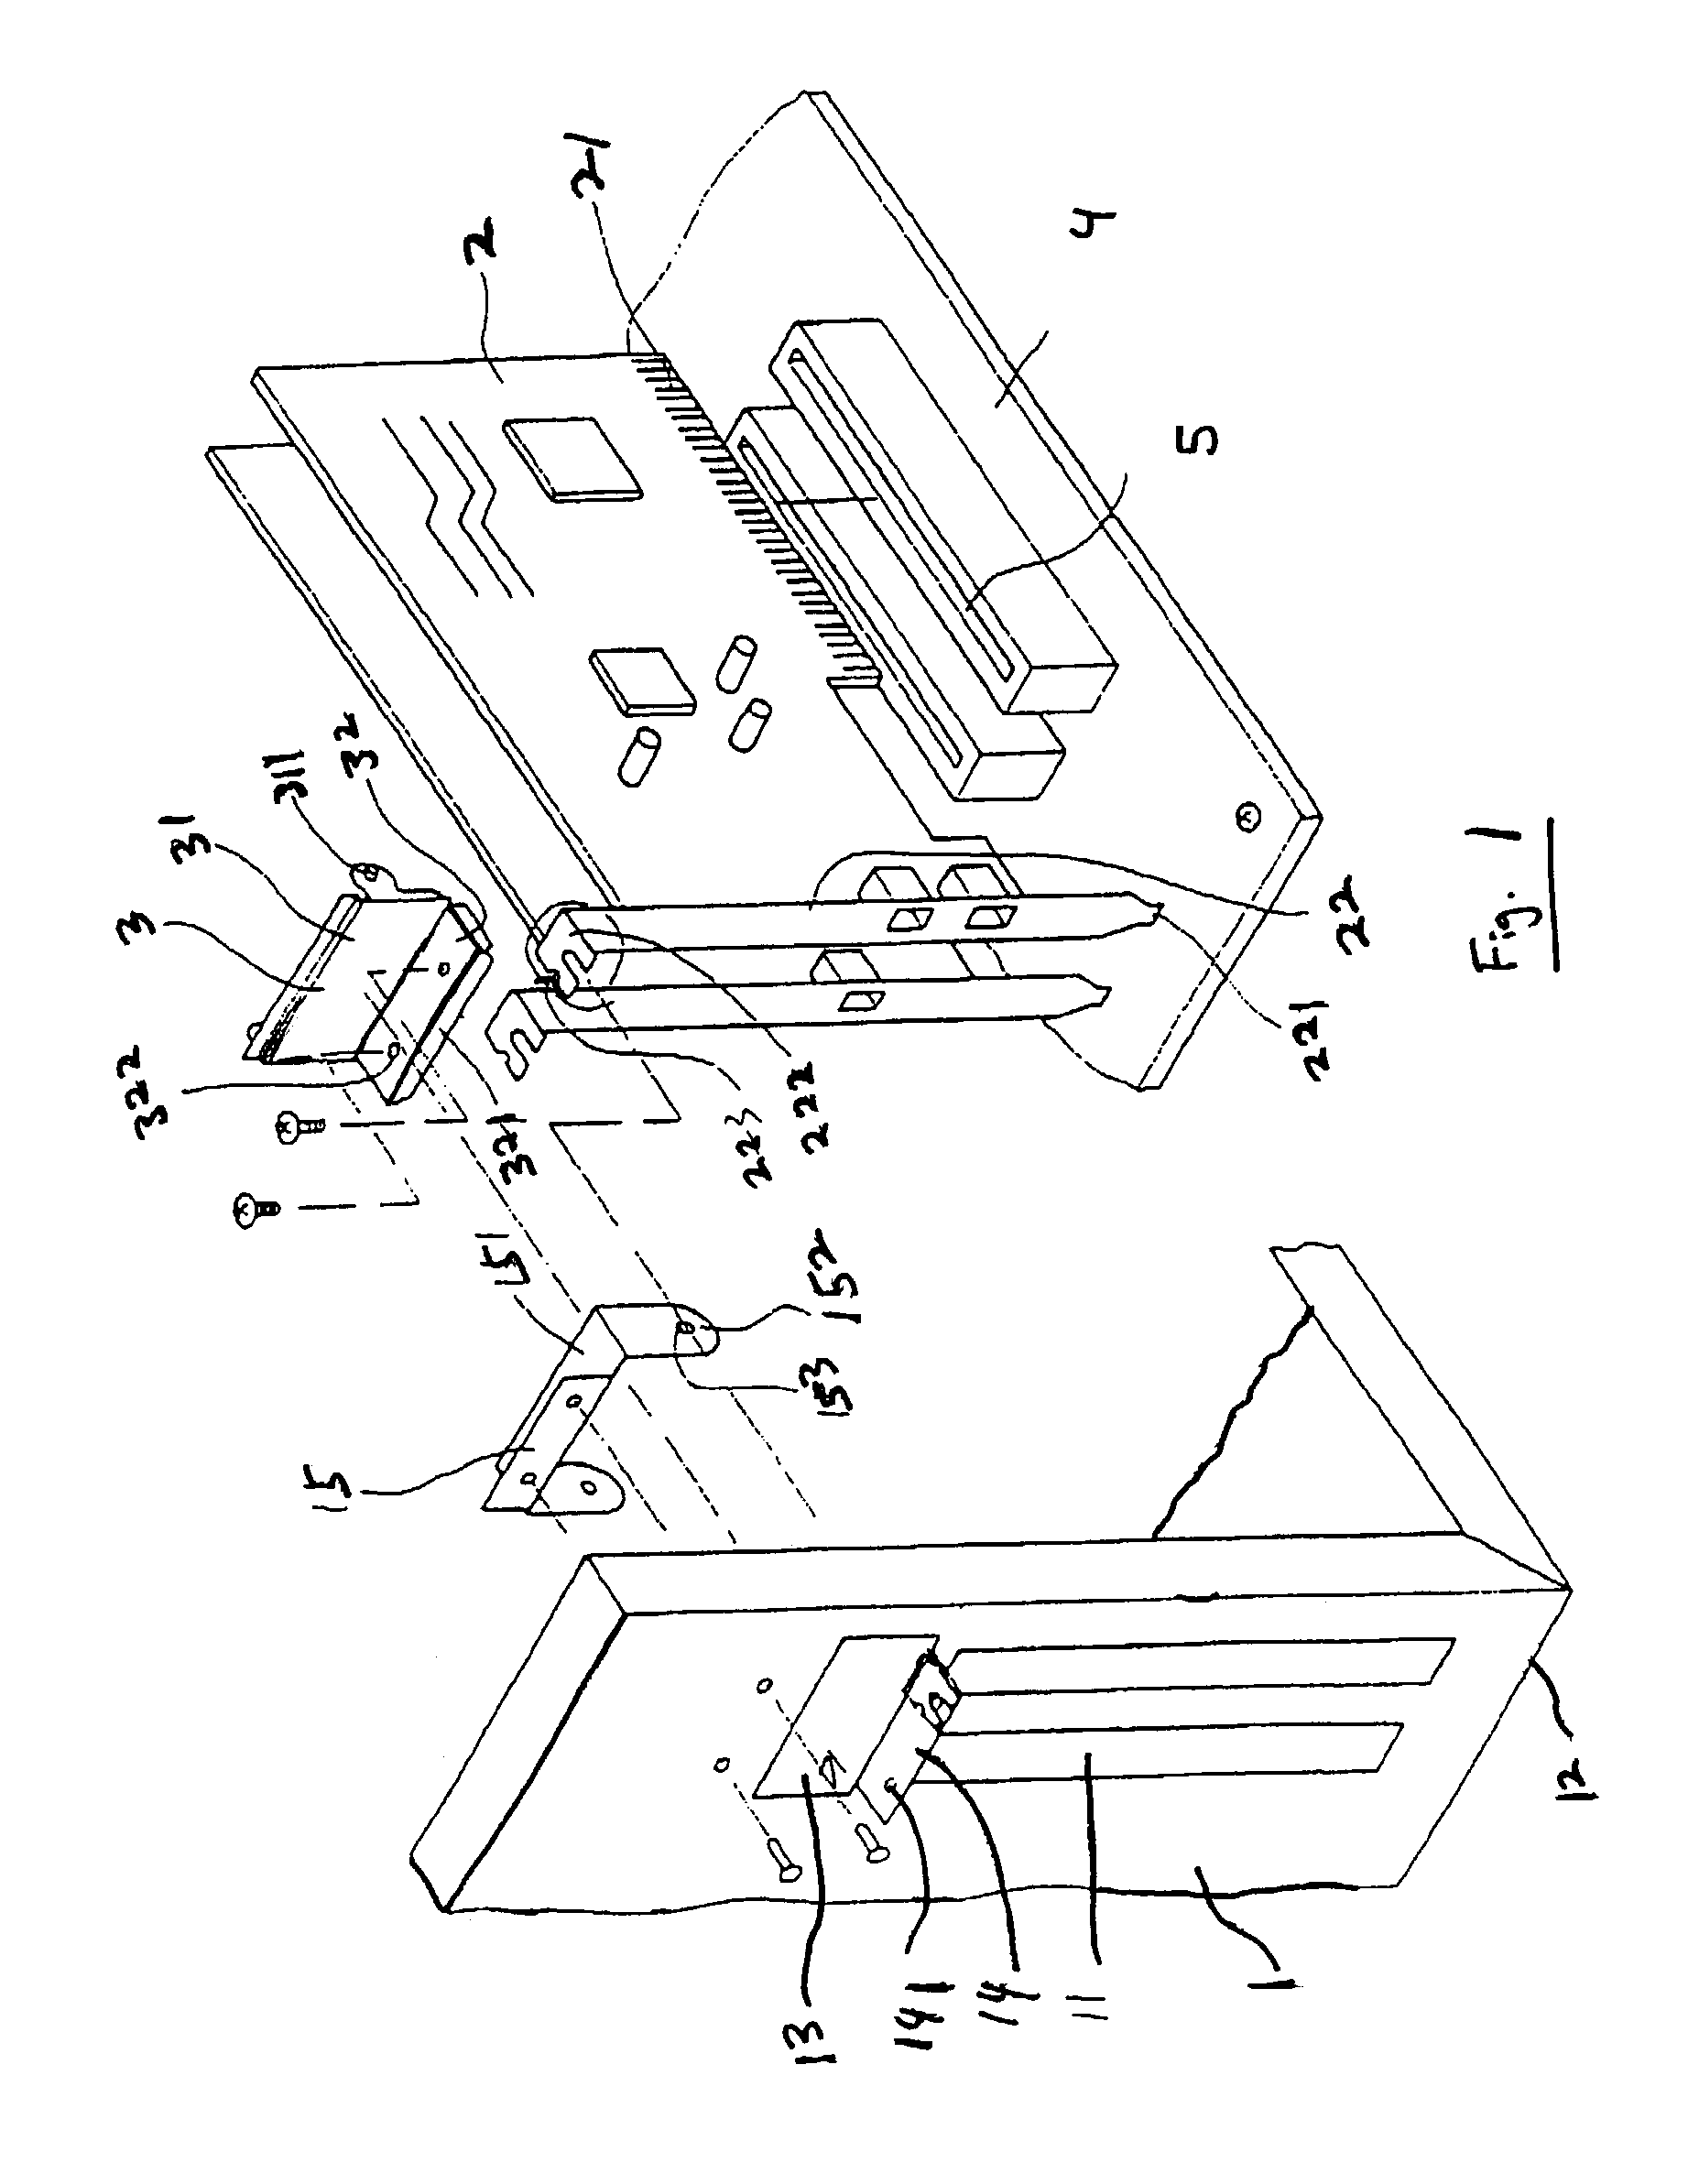 Mounting device for interface card